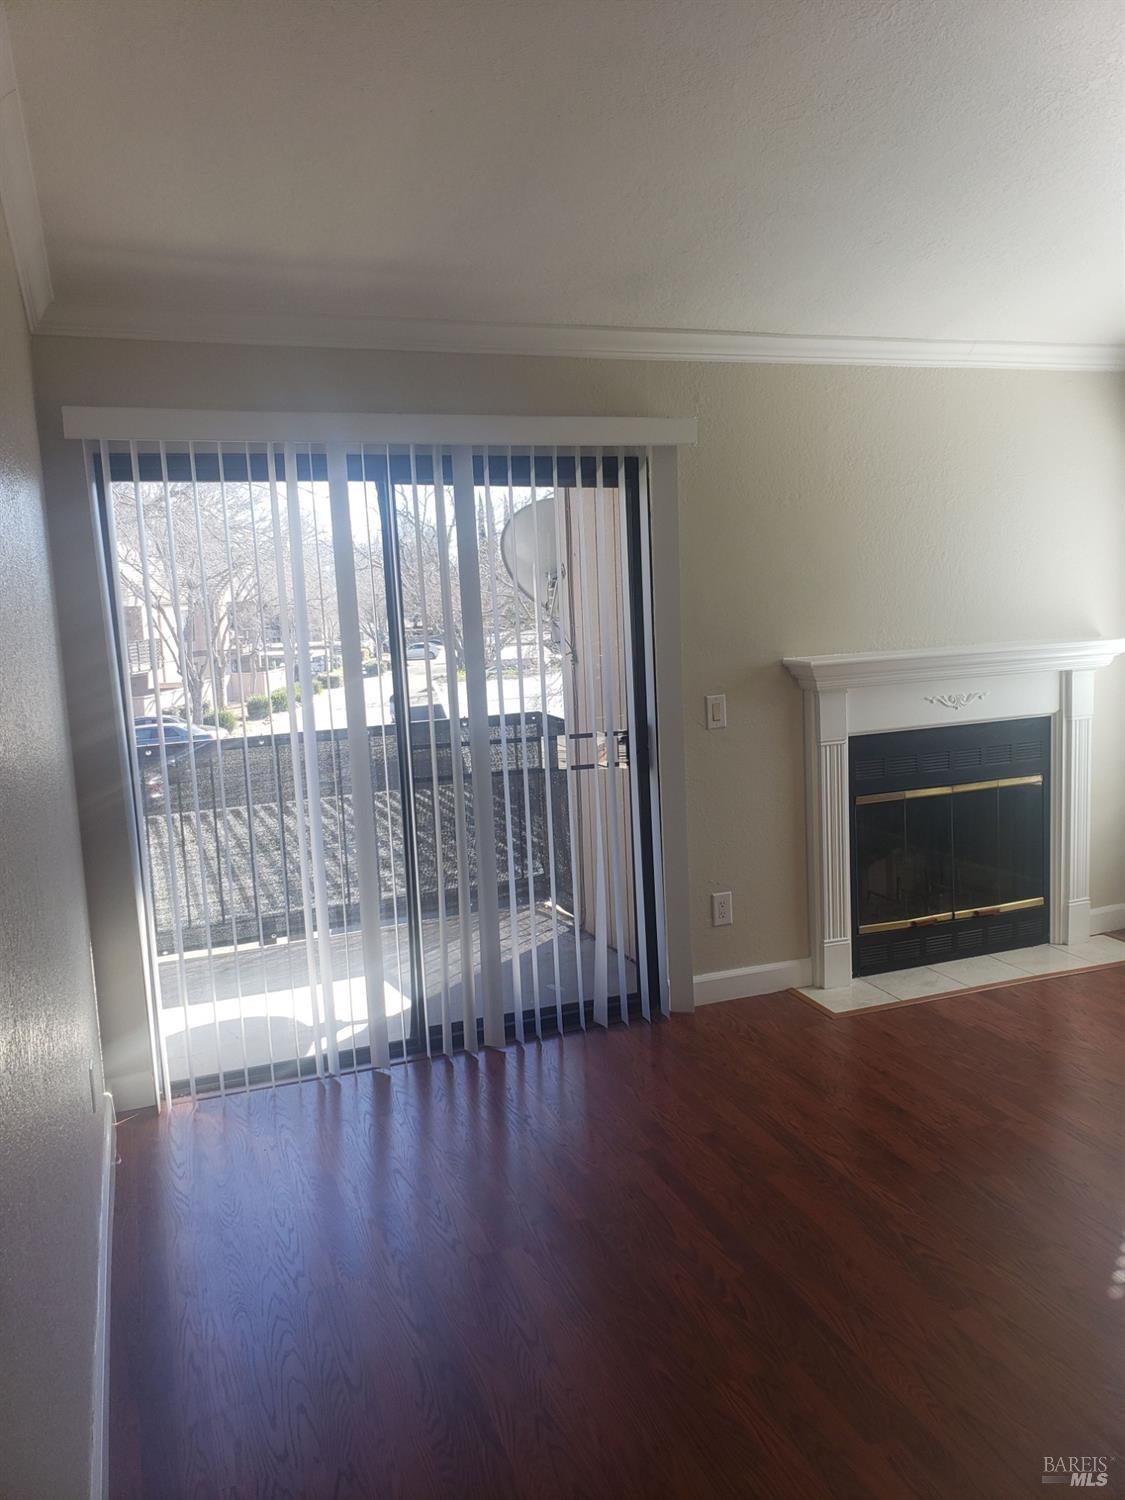 Photo of 1801 Marshall Rd #204 in Vacaville, CA